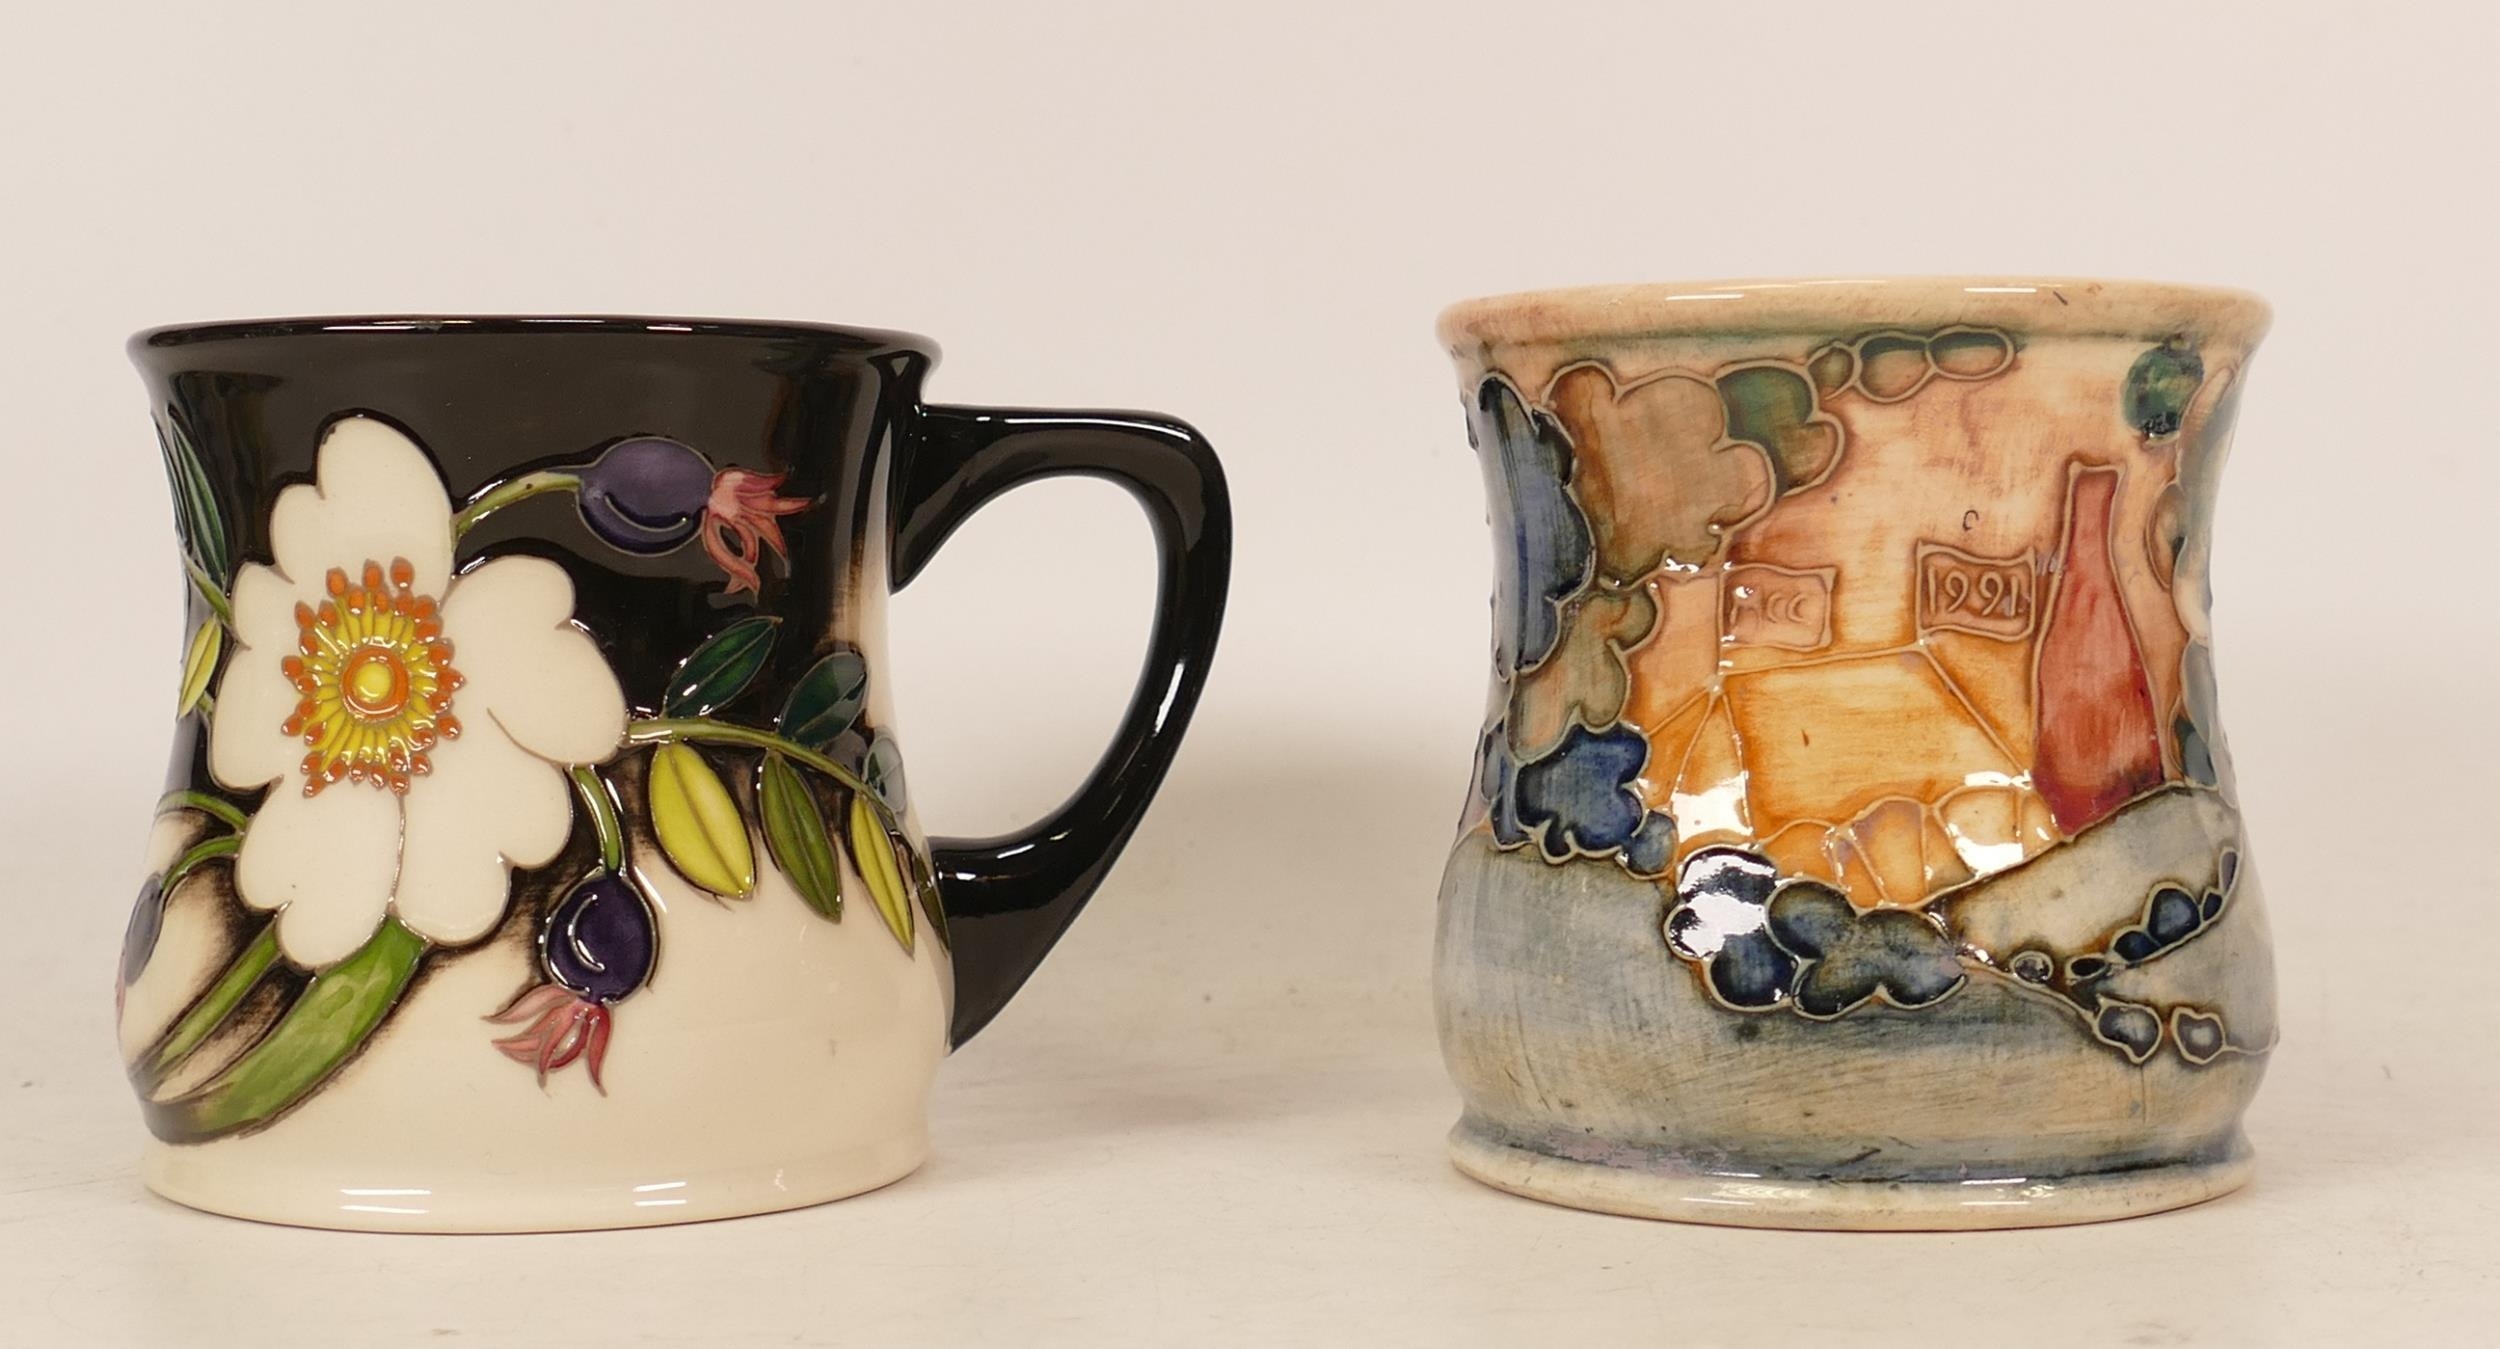 Moorcroft mug of the year 1991 and Moorcroft mug decorated with white flowers and berries, boxed (2)